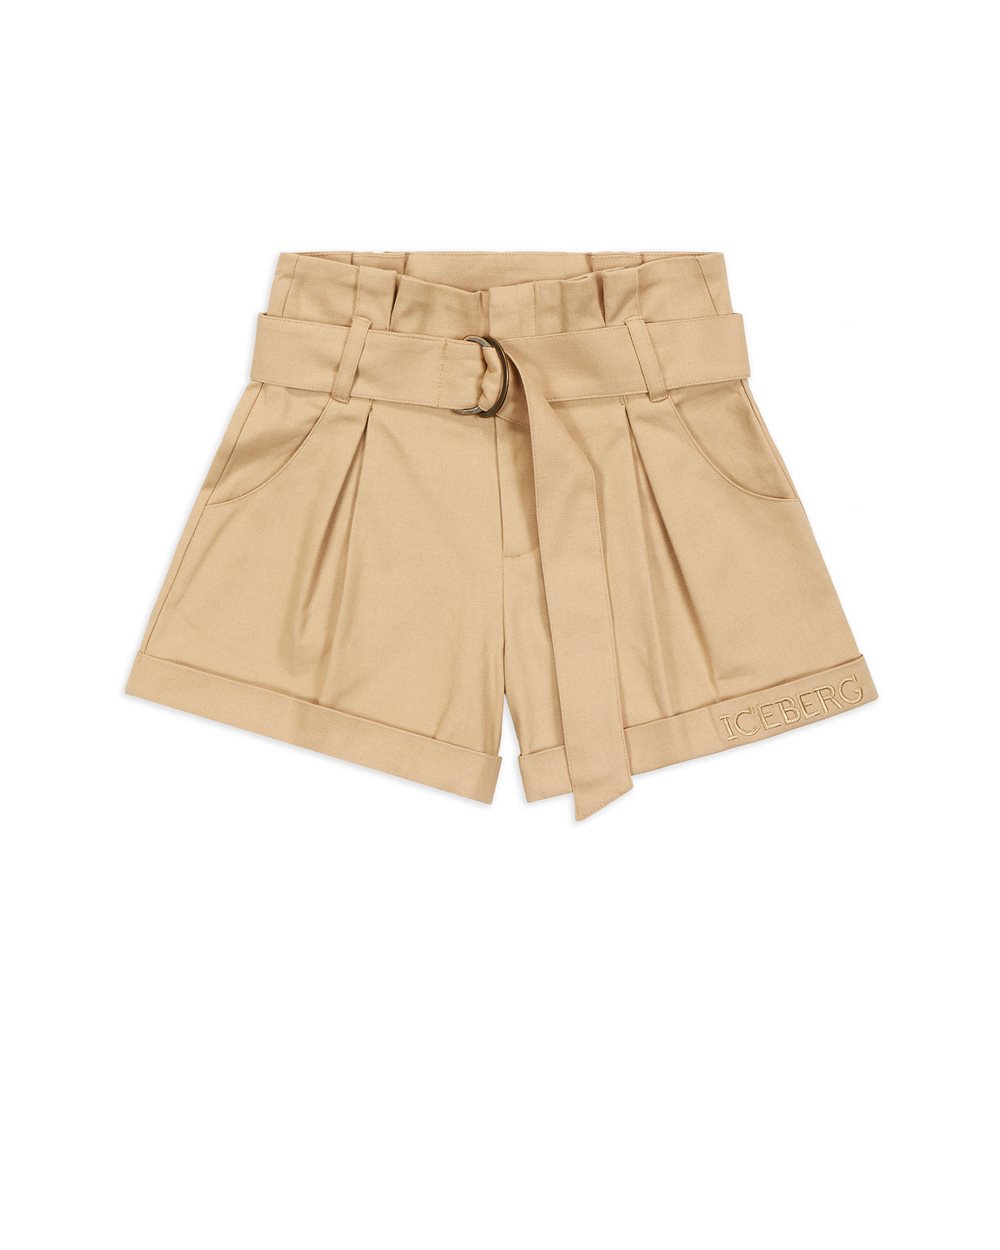 Shorts with belt and logo - Girl | Iceberg - Official Website